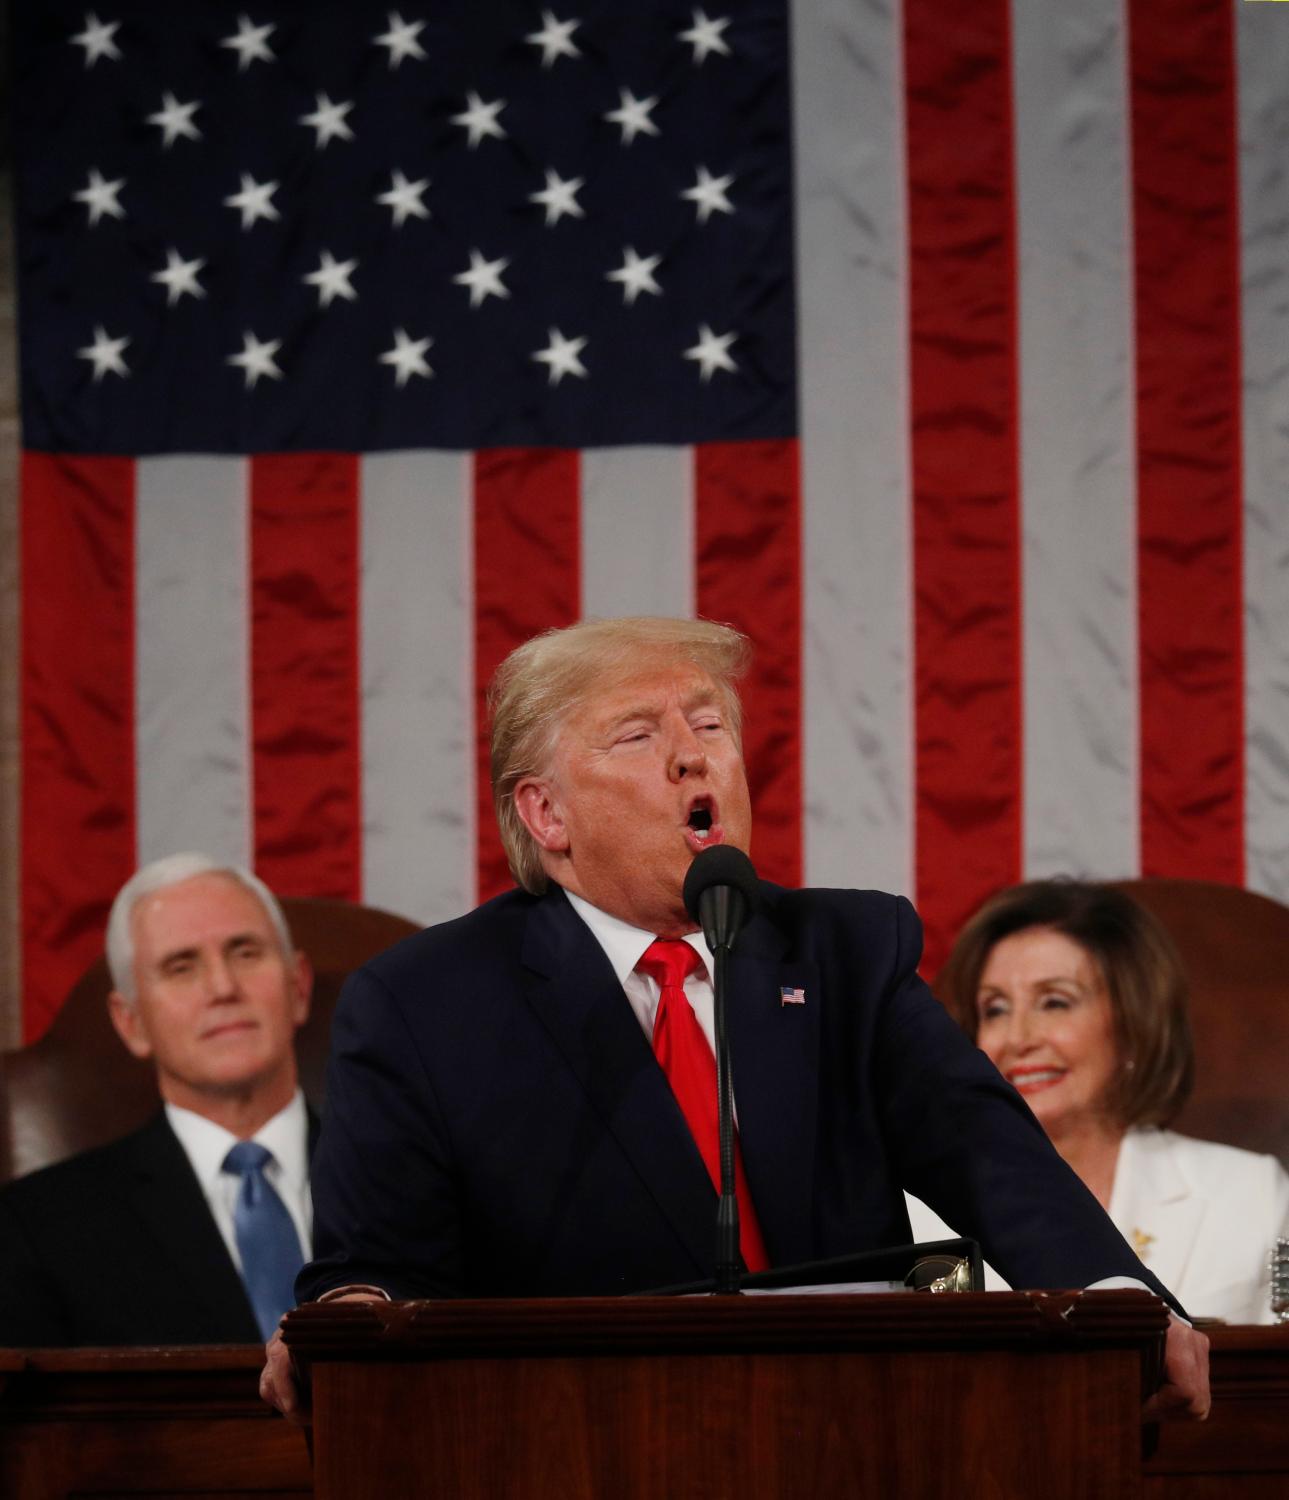 U.S. President Donald Trump delivers his State of the Union address to a joint session of the U.S. Congress in the House Chamber of the U.S. Capitol in Washington, U.S. February 4, 2020. REUTERS/Leah Millis/POOL